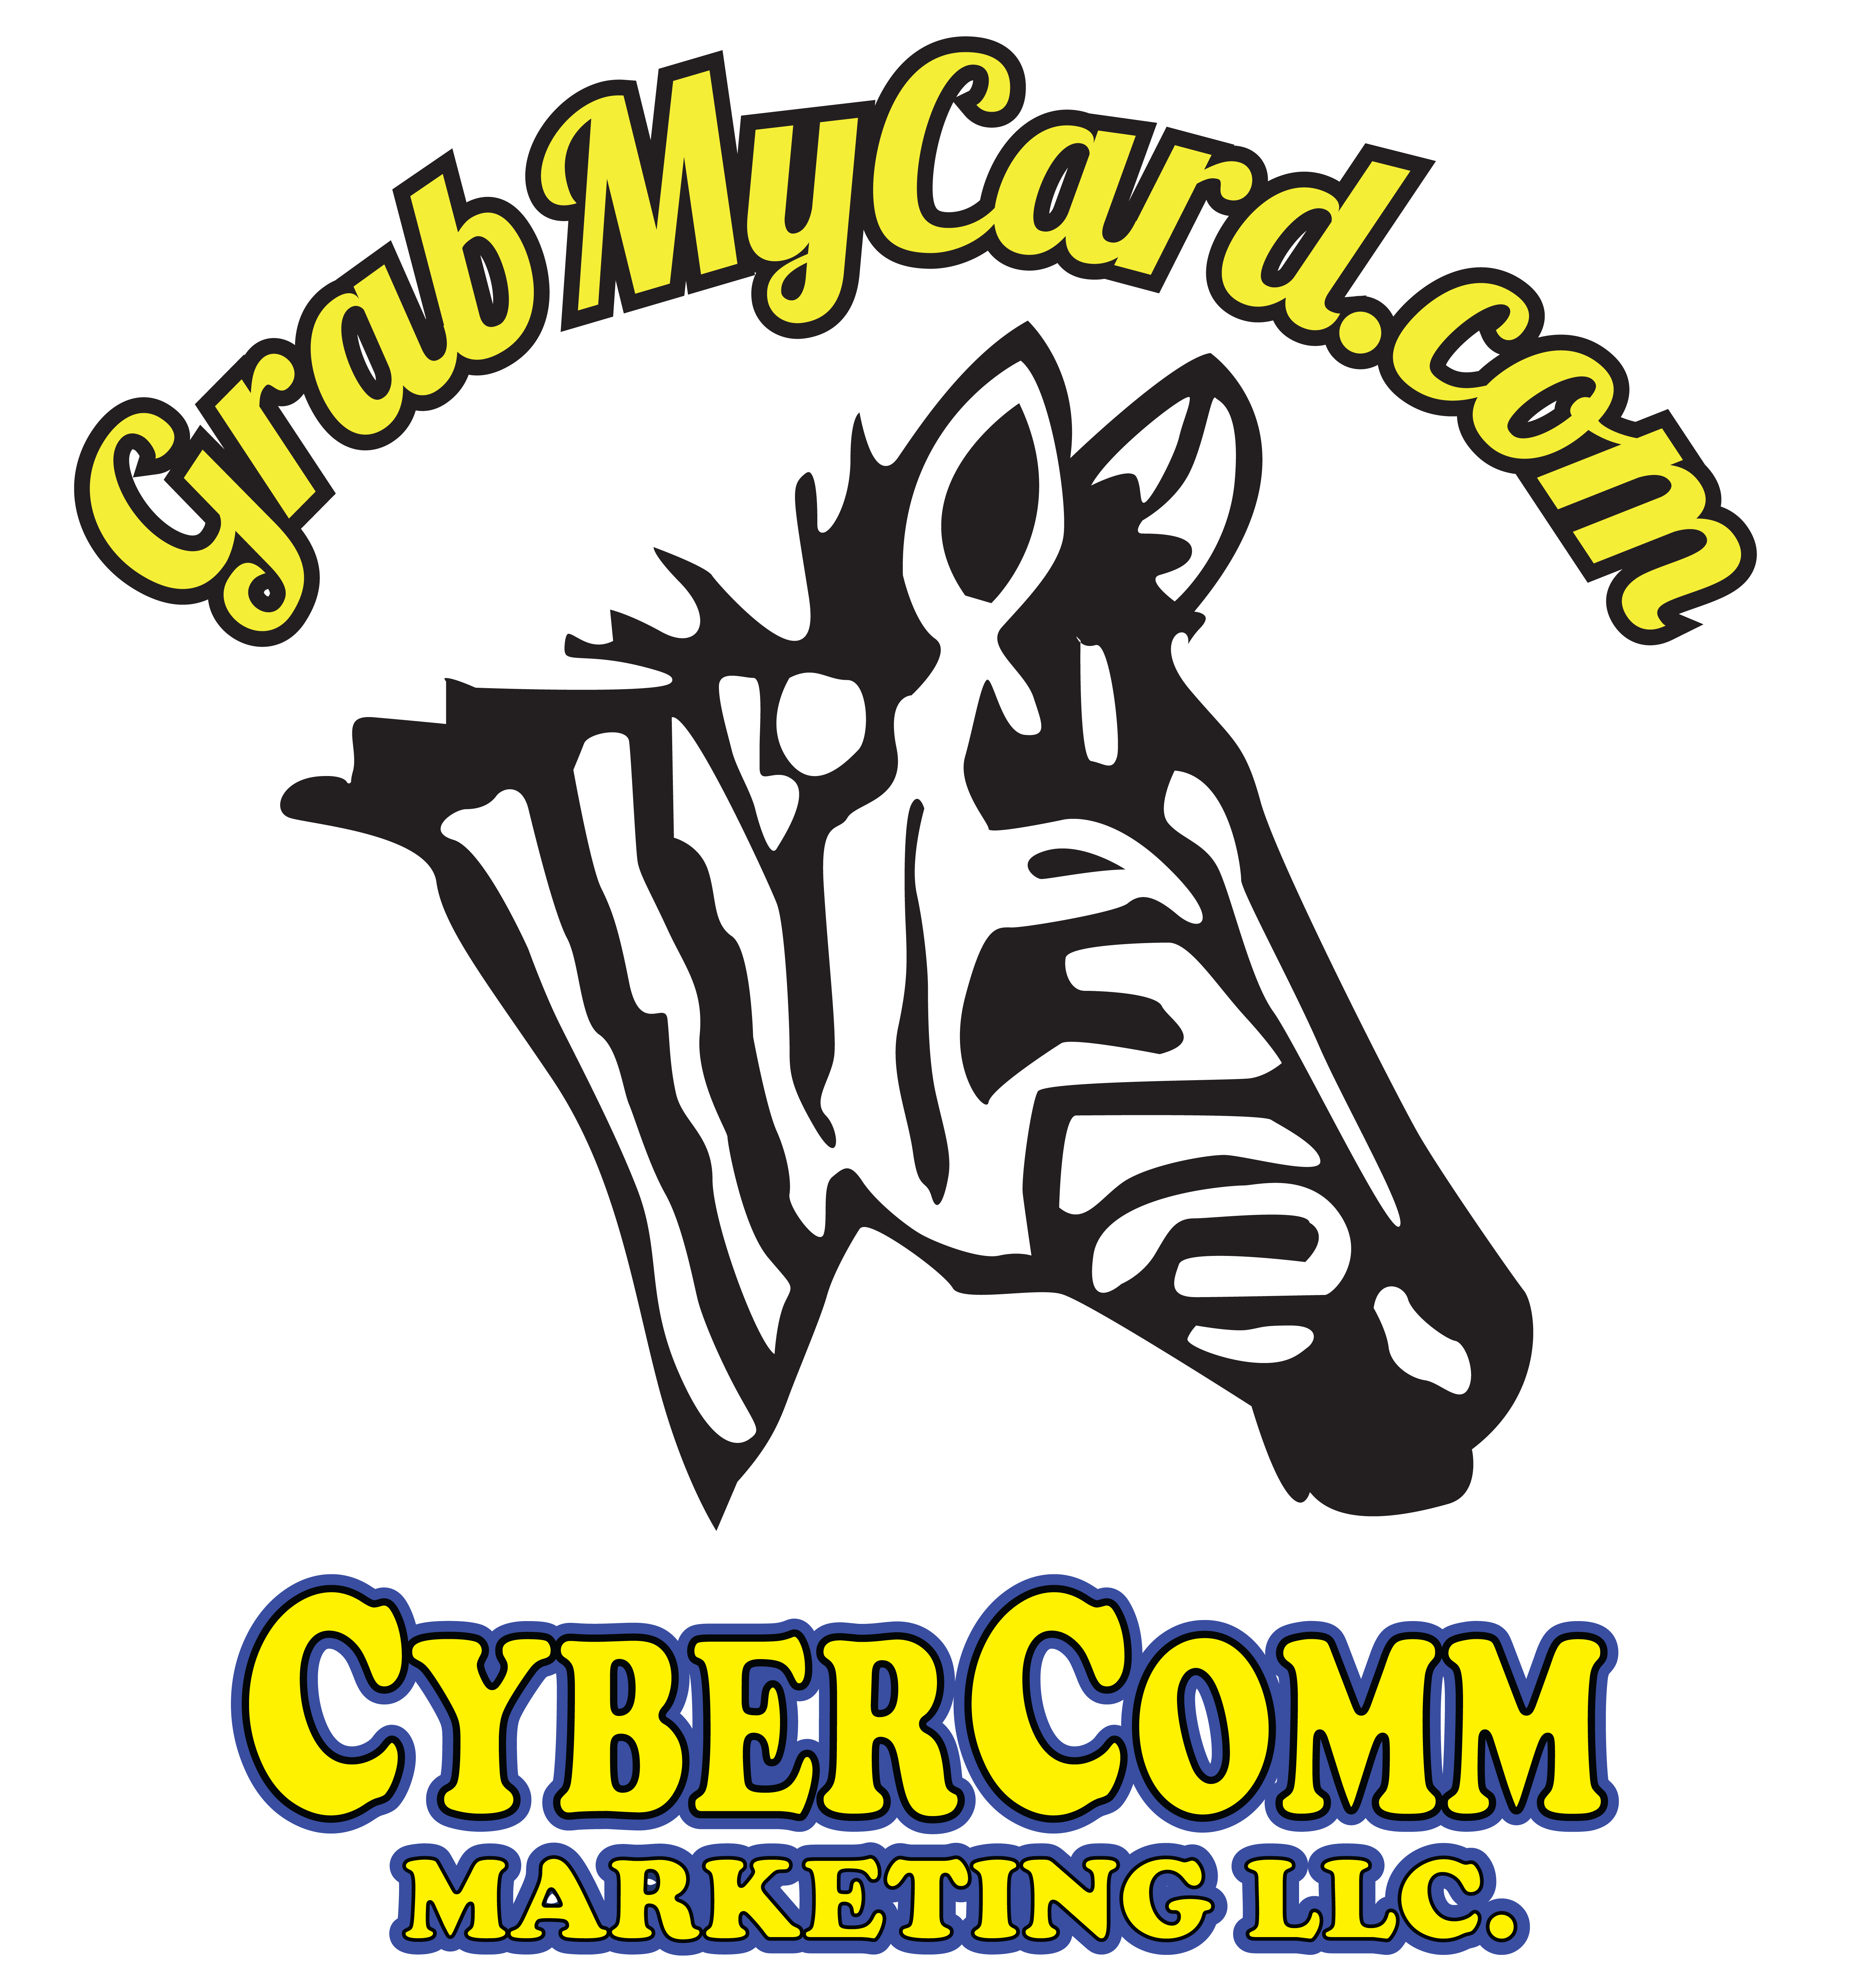 Will Petersons Business Card by GrabMyCard.com and CyberComm Marketing LLC is the business card that will never get lost